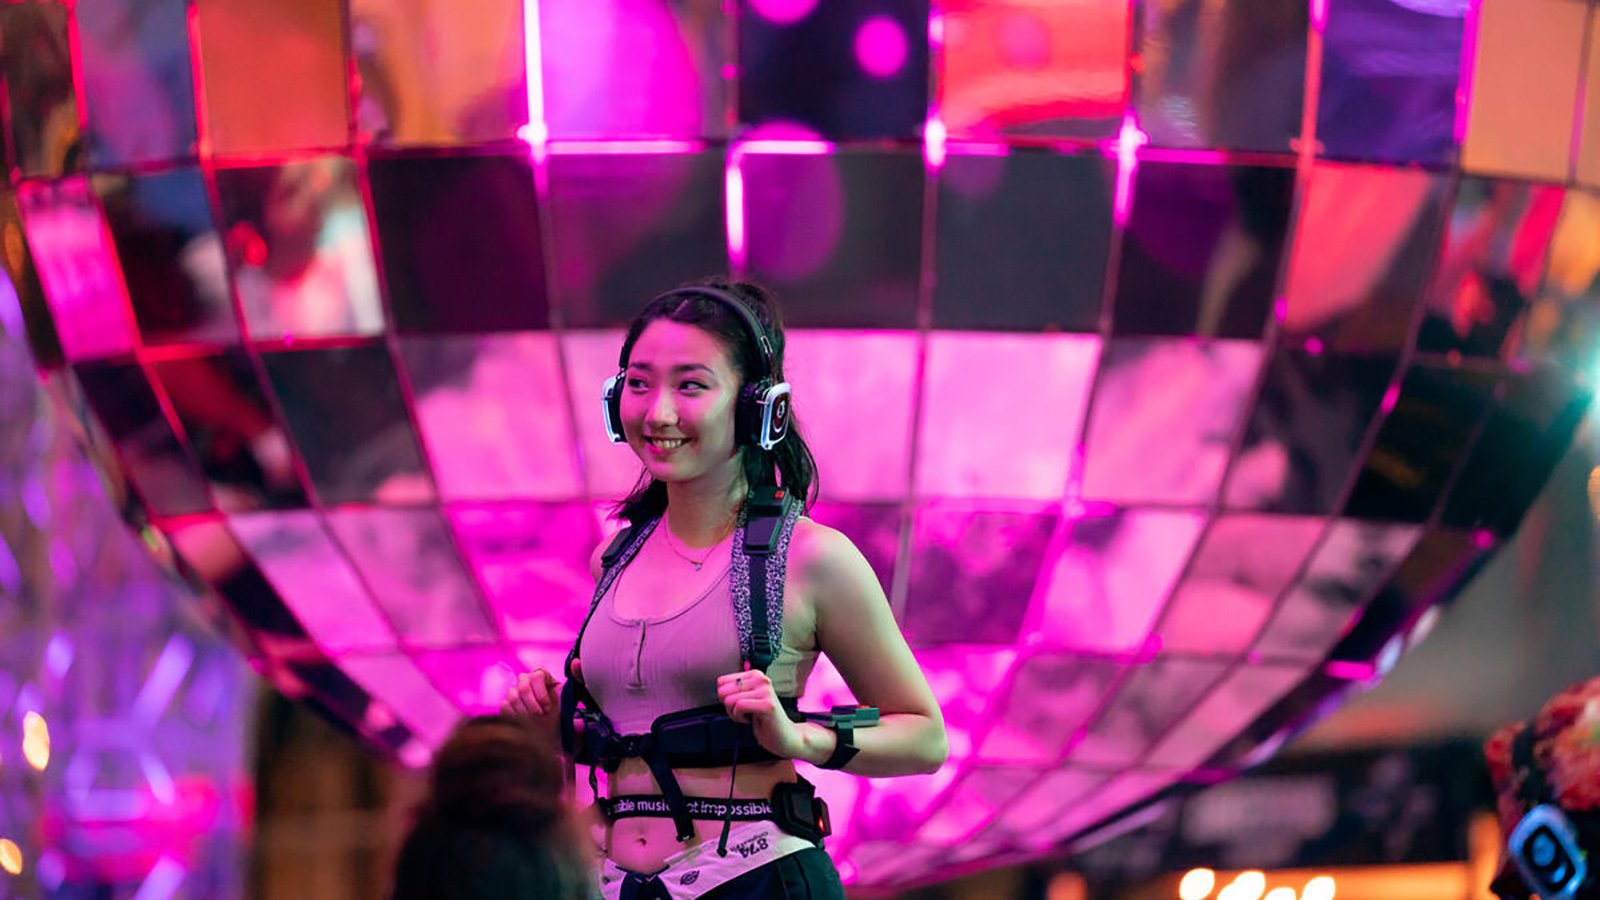 A person smiles, bathed in purple light, as they stand in front of a massive glittering disco ball while wearing over-ear headphones.